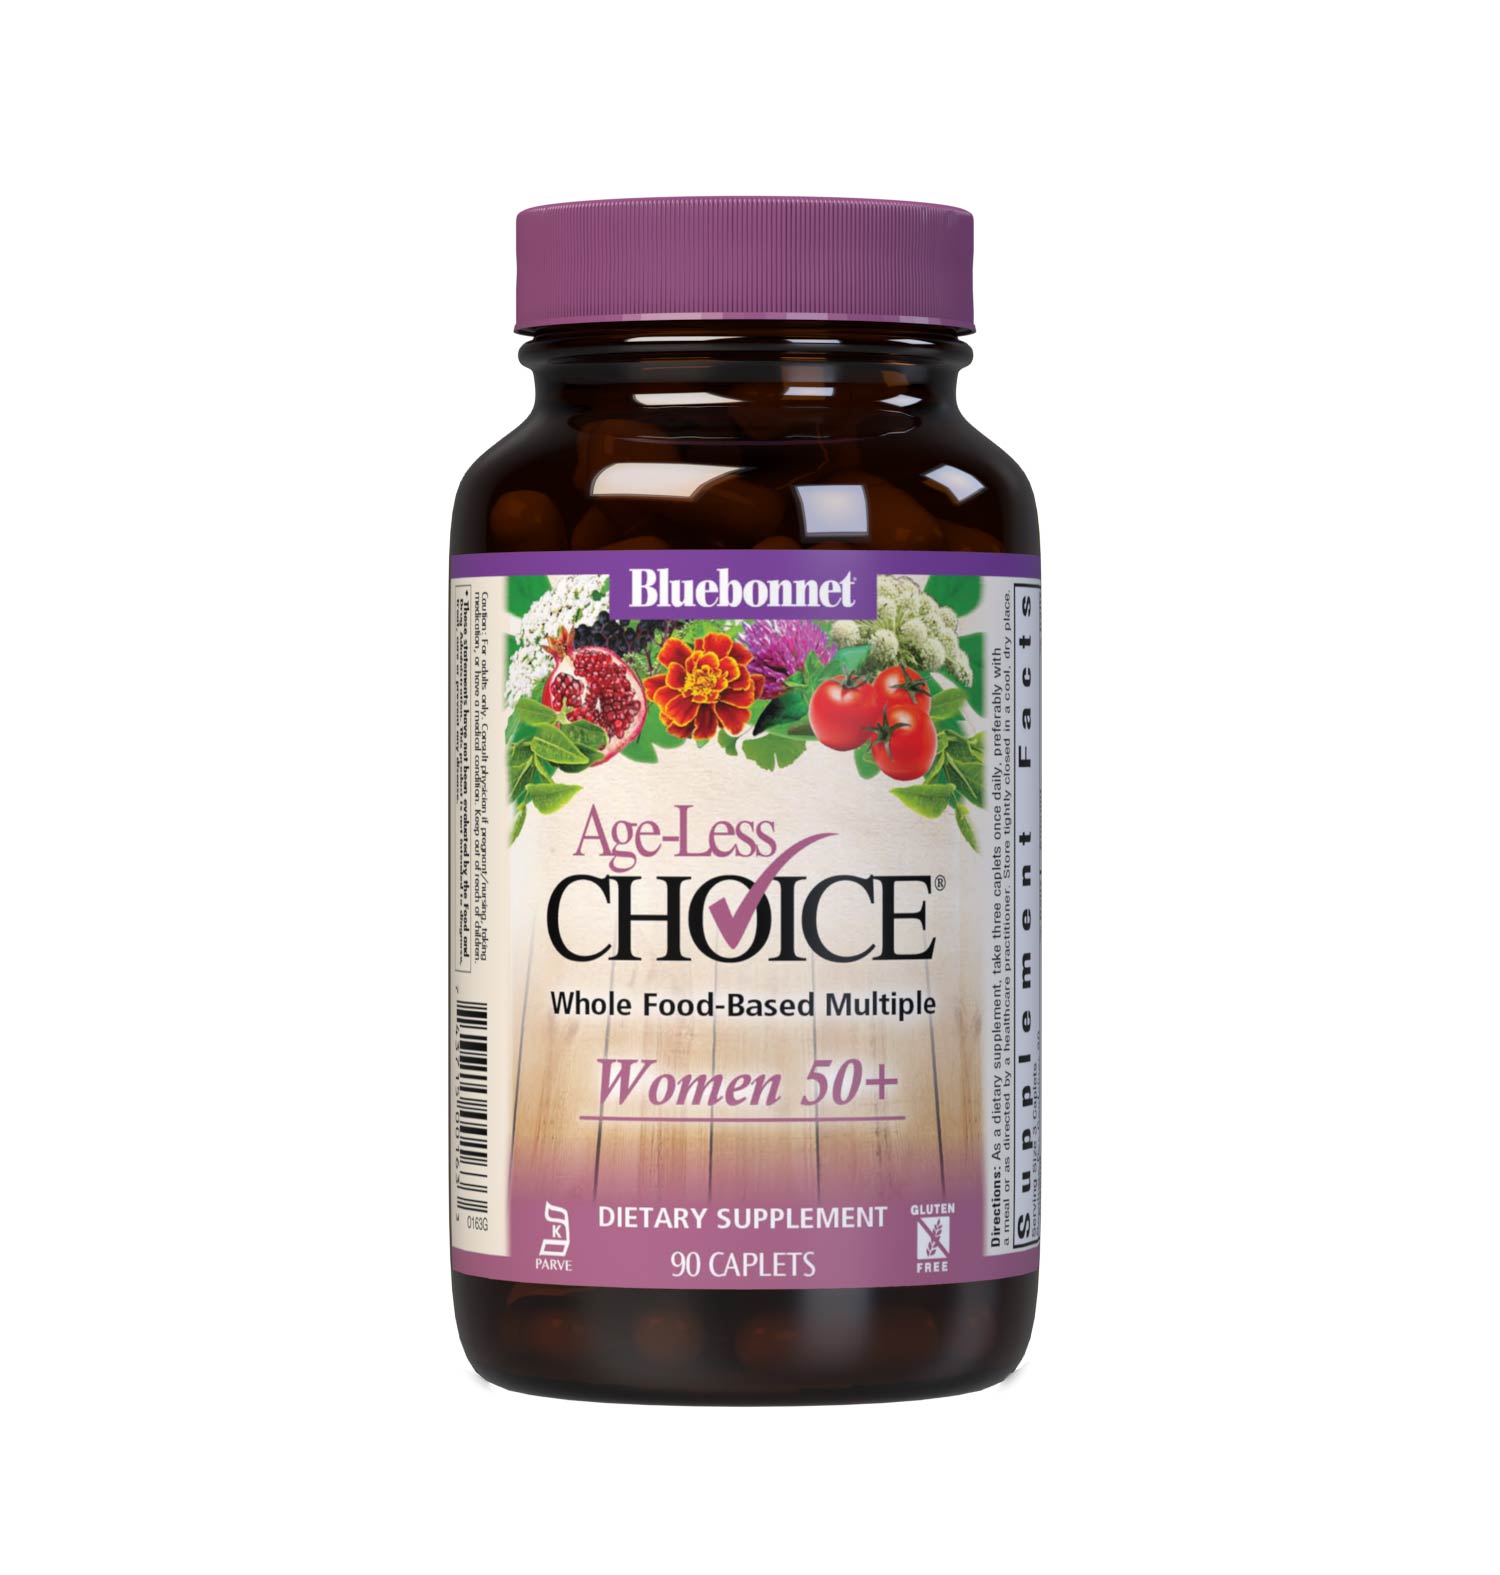 Bluebonnet’s Age-Less Choice for Women 50+ 90 Caplets are a three-a-day whole food-based multivitamin and multimineral dietary supplement designed for women 50+ and are available in easy-to-swallow caplets for maximum assimilation and absorption. #size_90 count